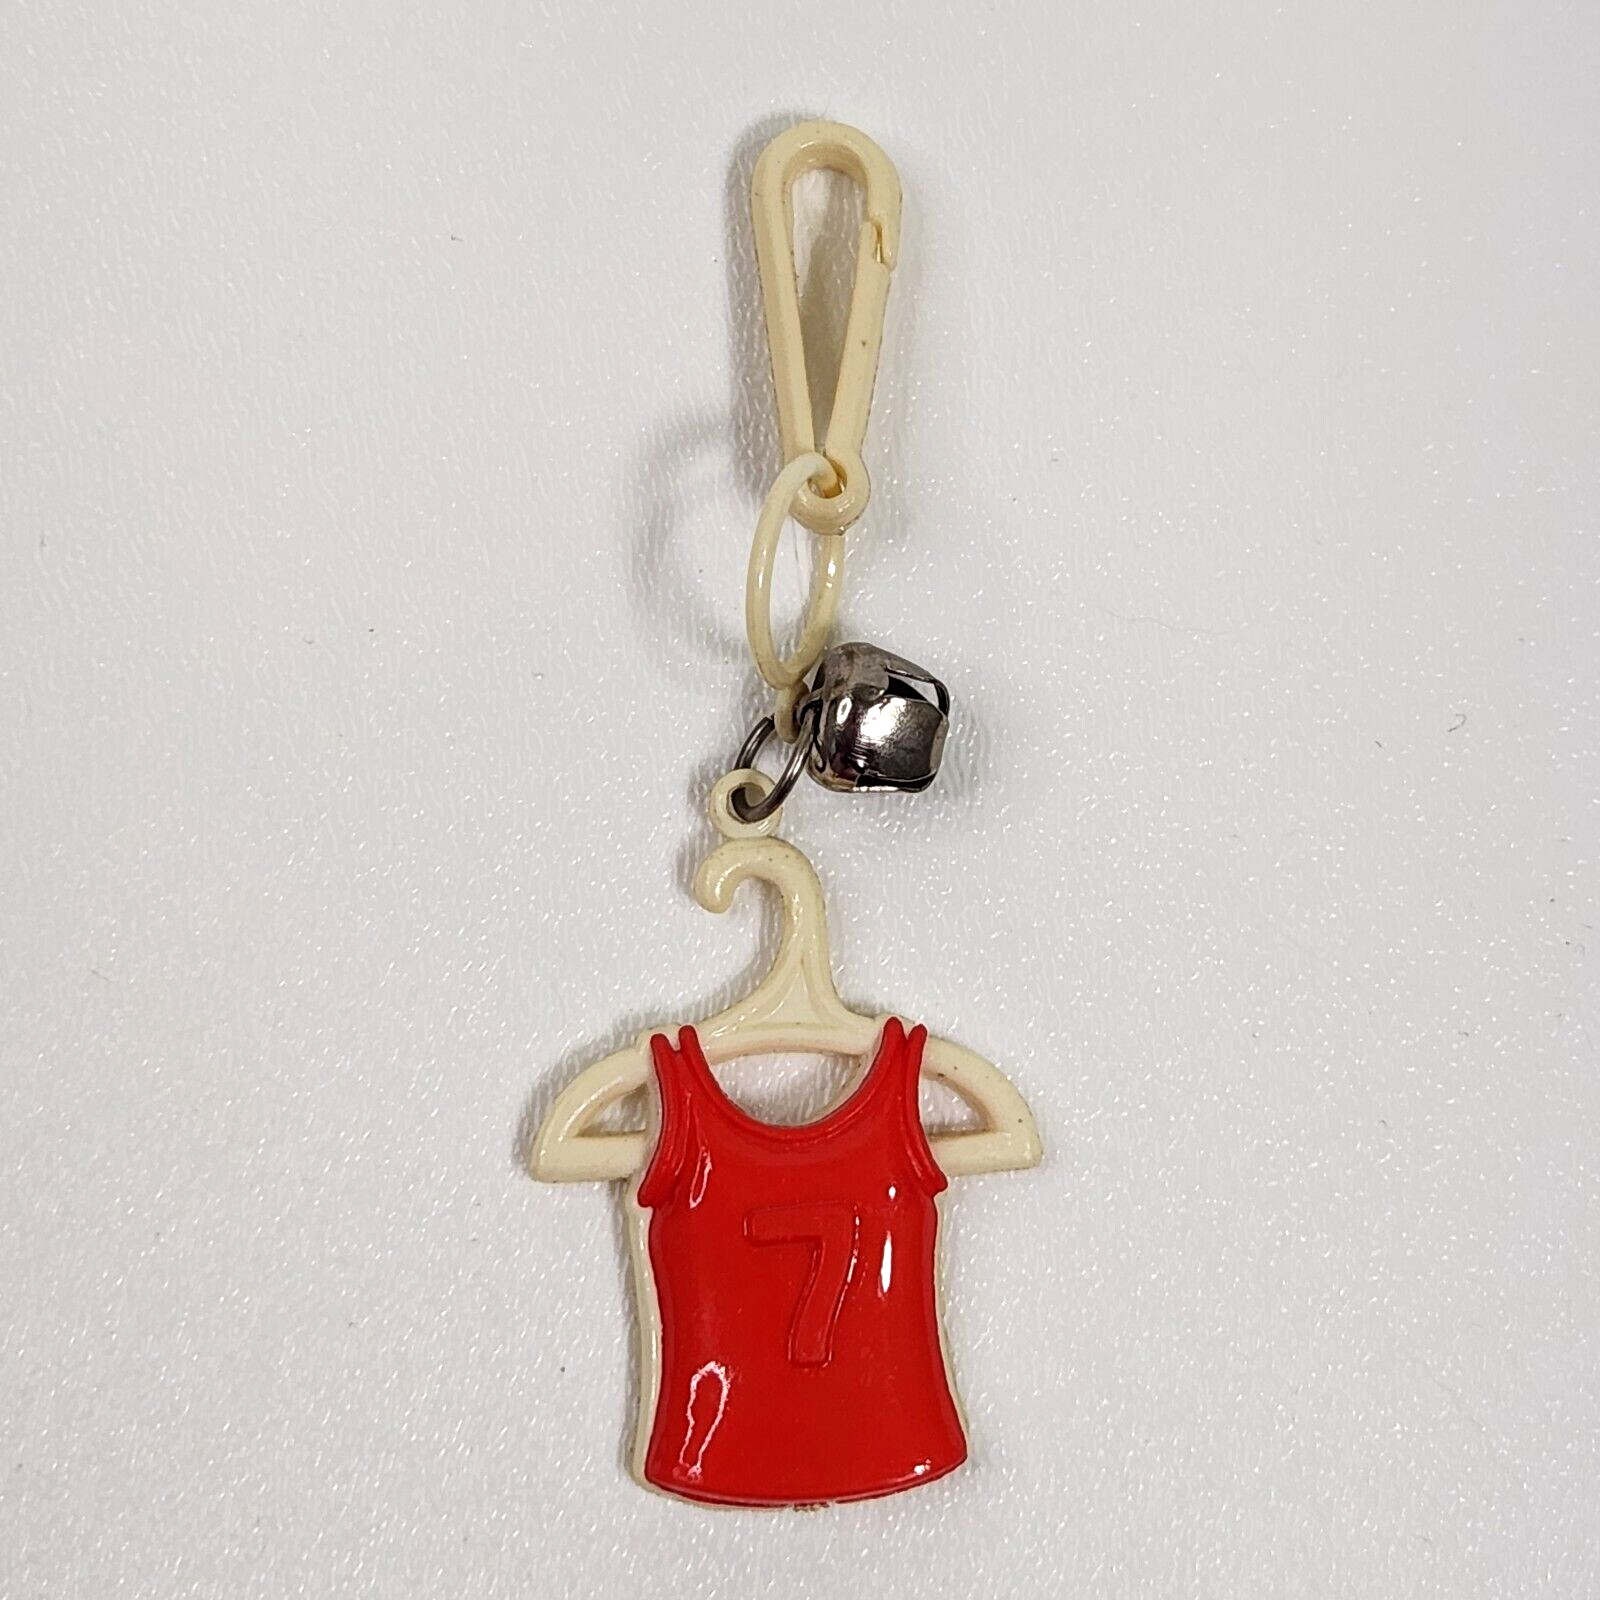 Vintage 1980s Plastic Bell Charm 7 Jersey Shirt For 80s Necklace